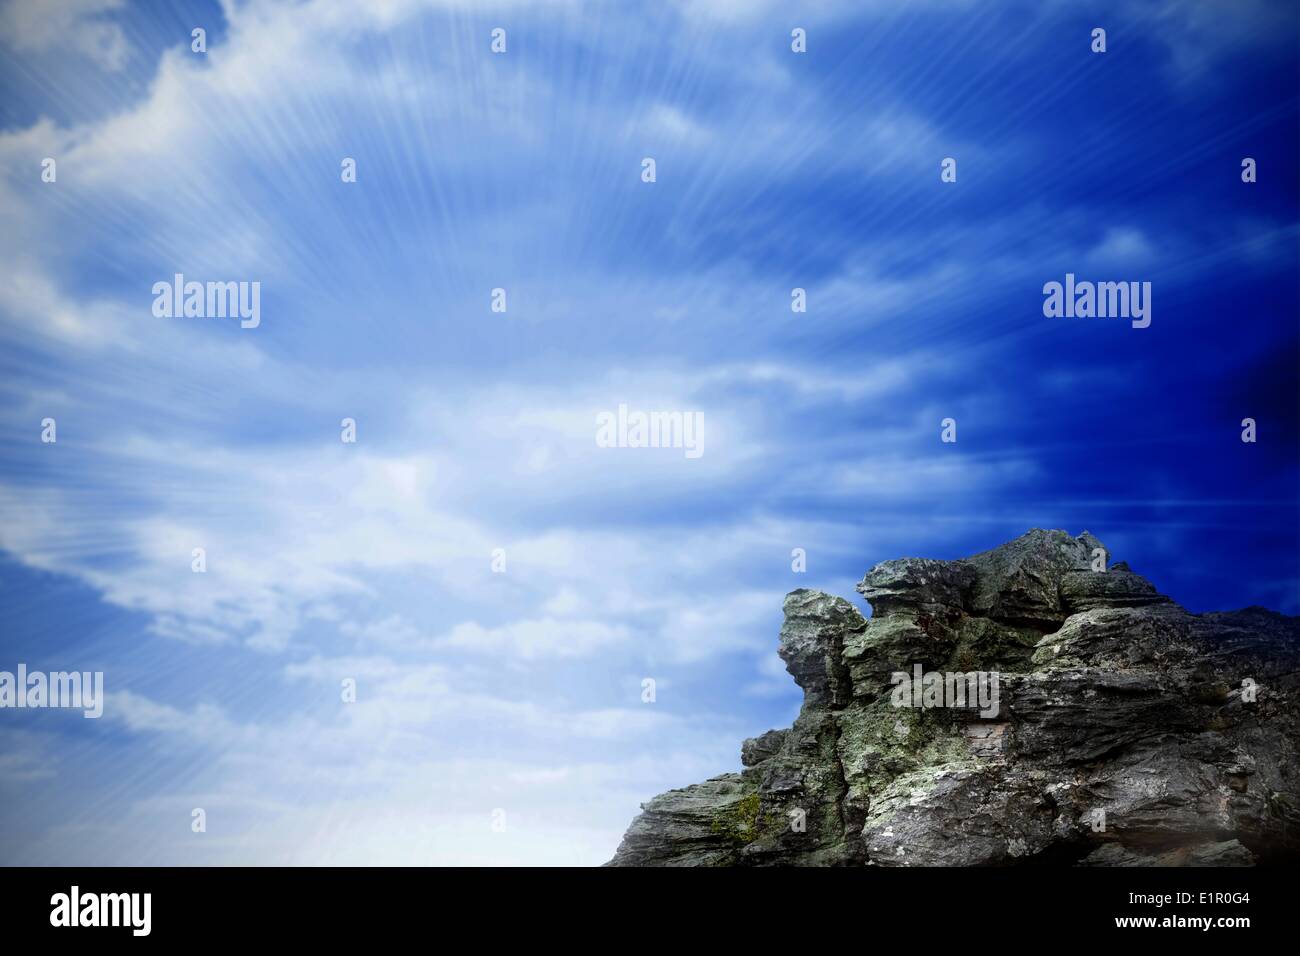 Large rock overlooking bright blue sky Stock Photo